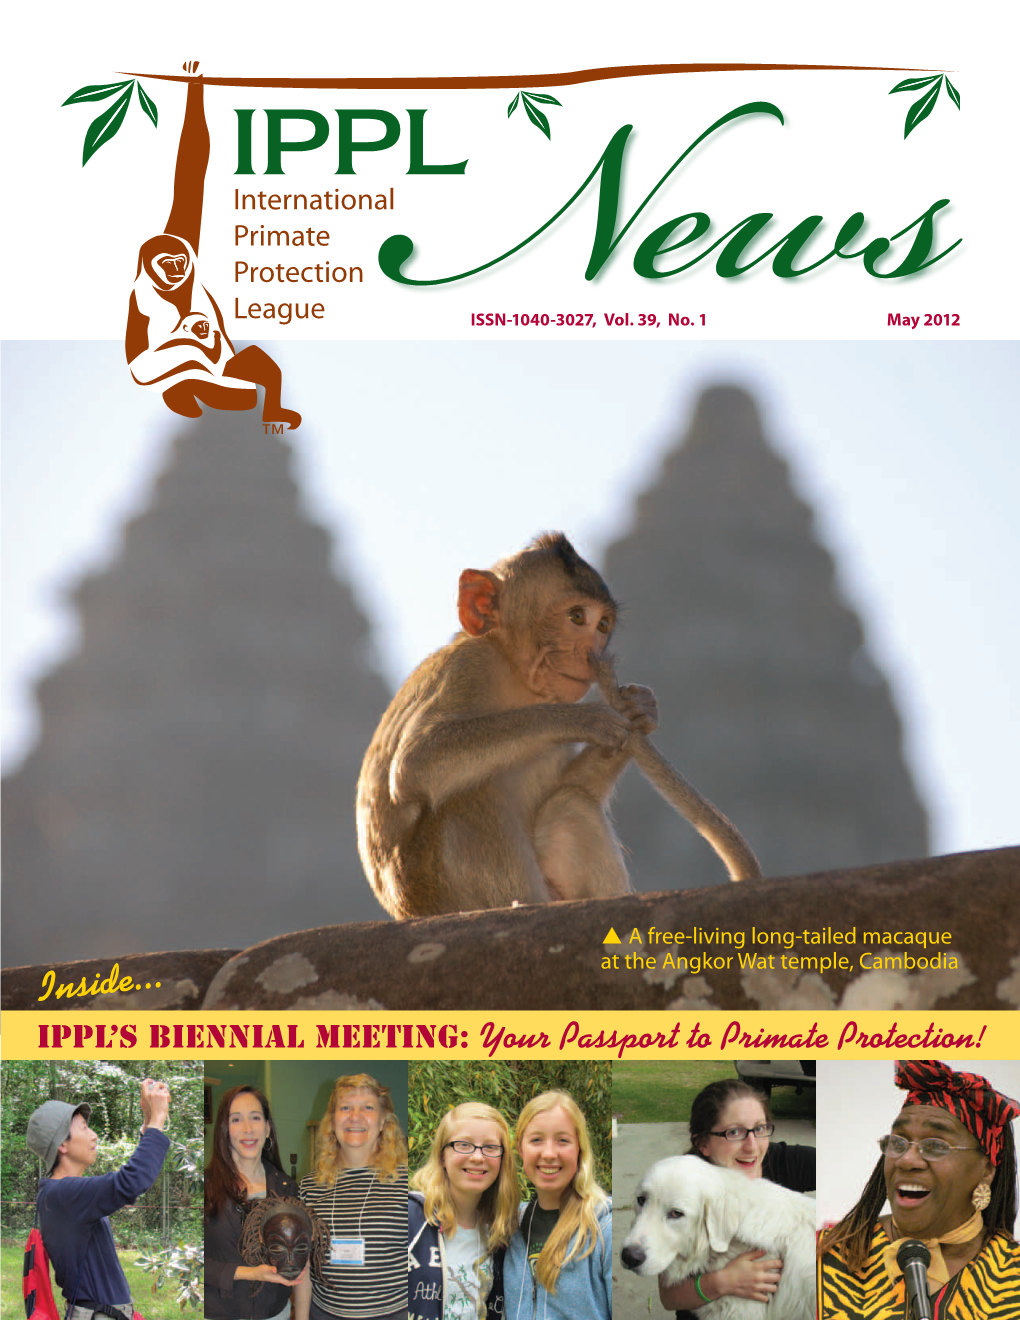 Inside... IPPL’S Biennial Meeting: Your Passport to Primate Protection! a Letter from IPPL’S Executive Director Shirley Mcgreal